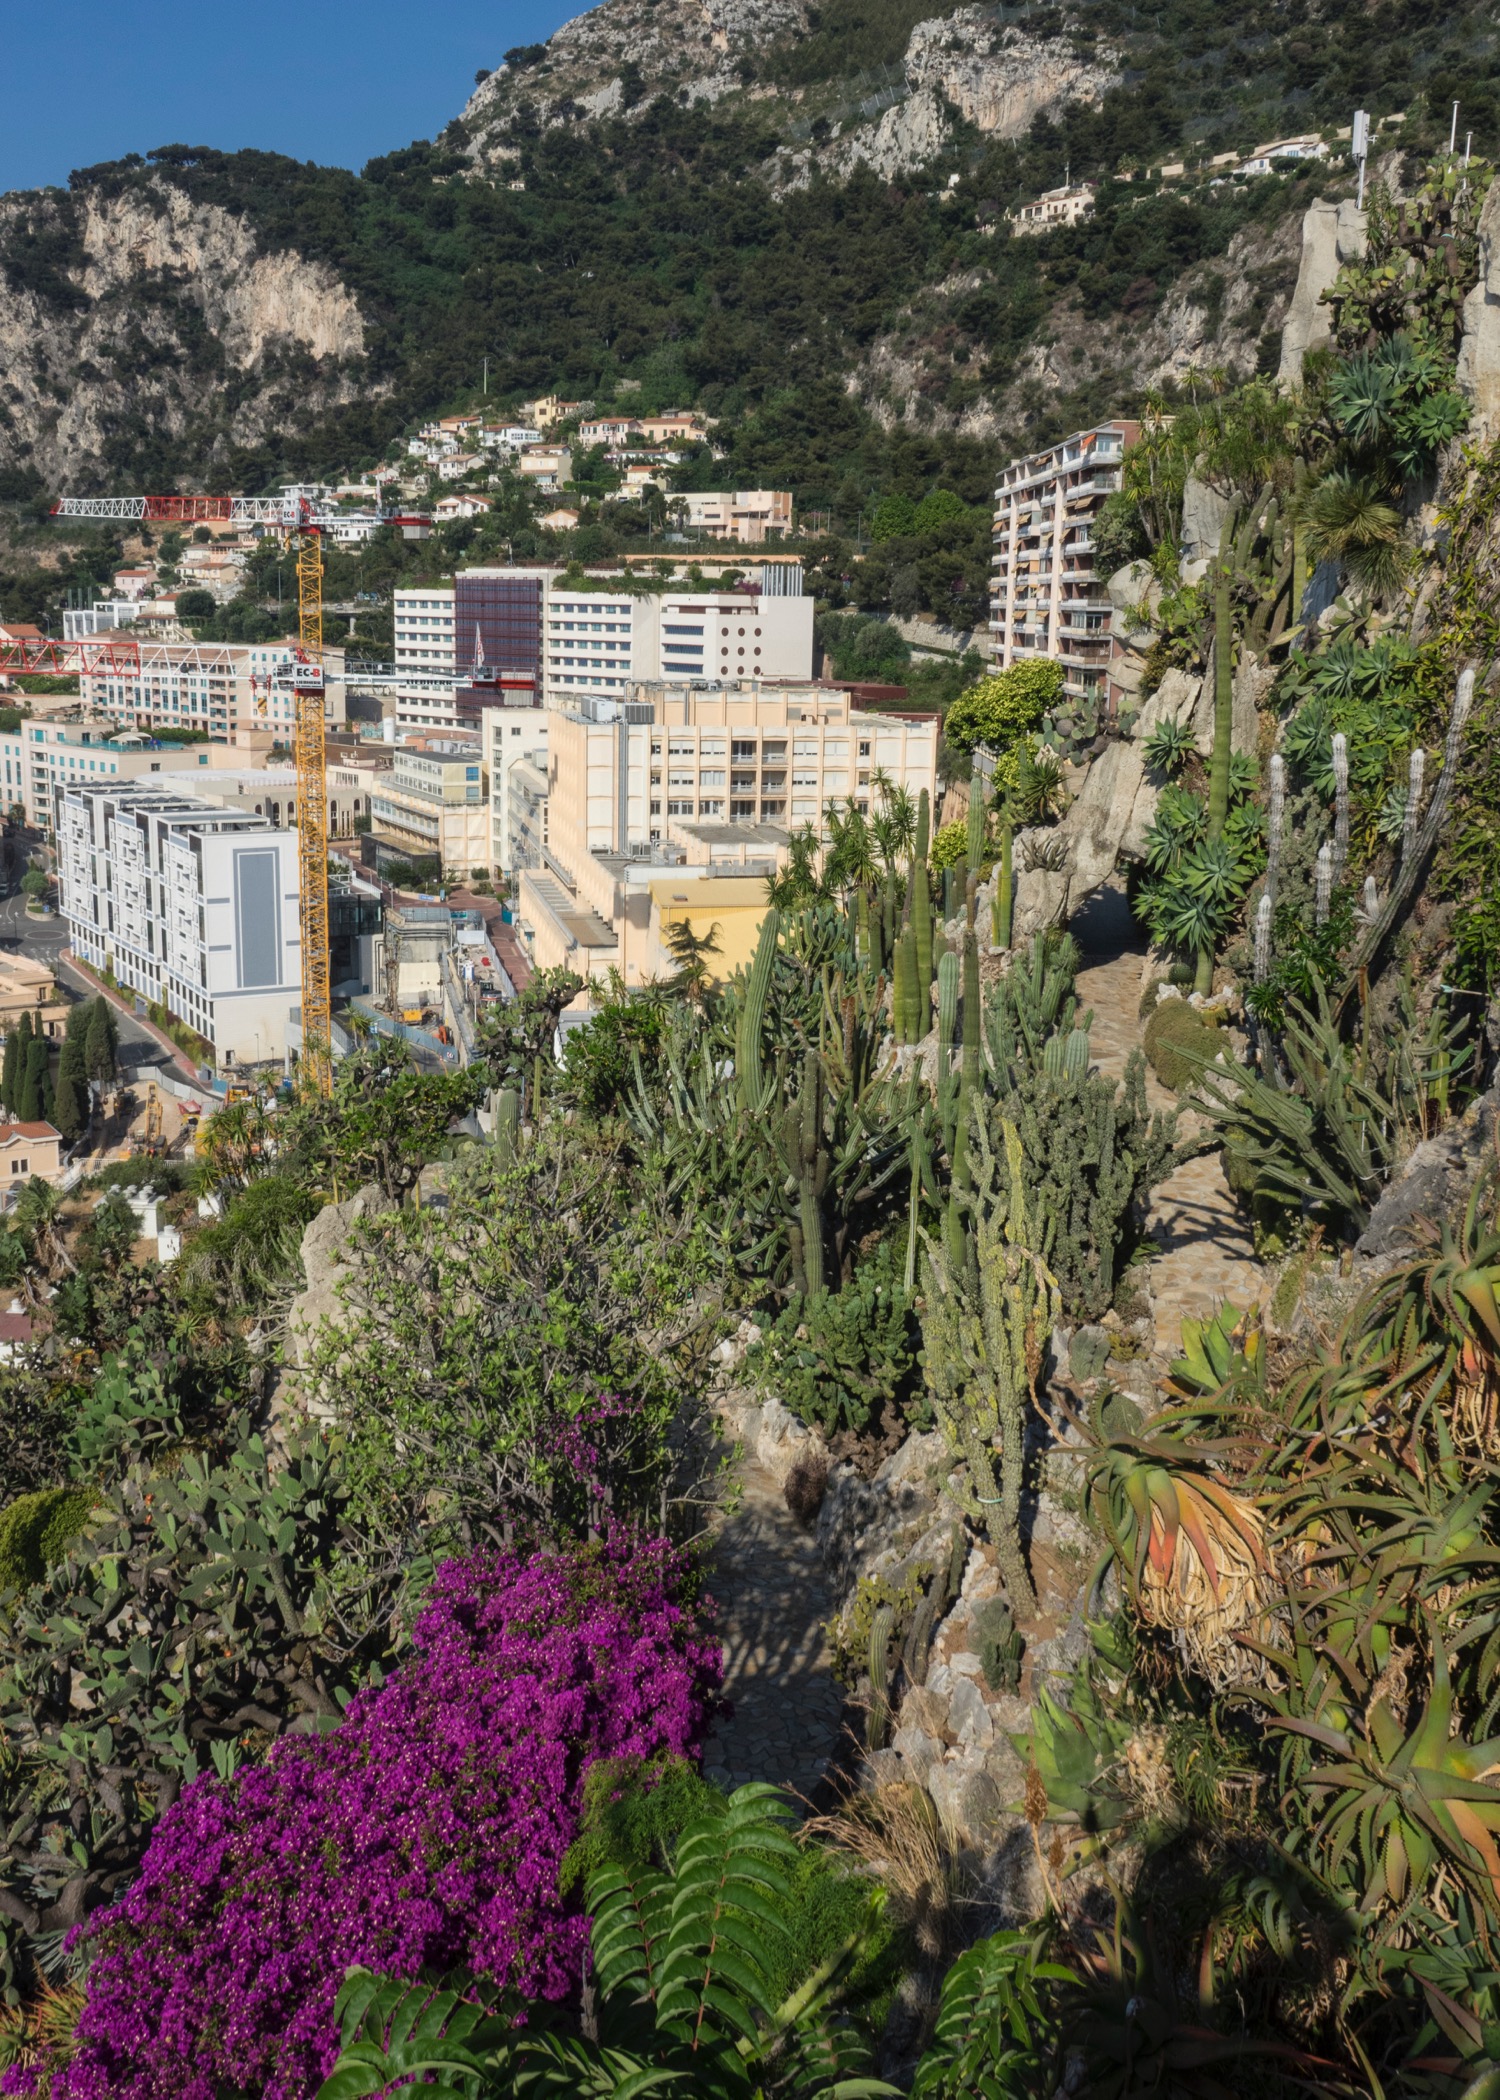 Most of the gardens are built into the steep cliff face, with amazing view out over the city and the ocean